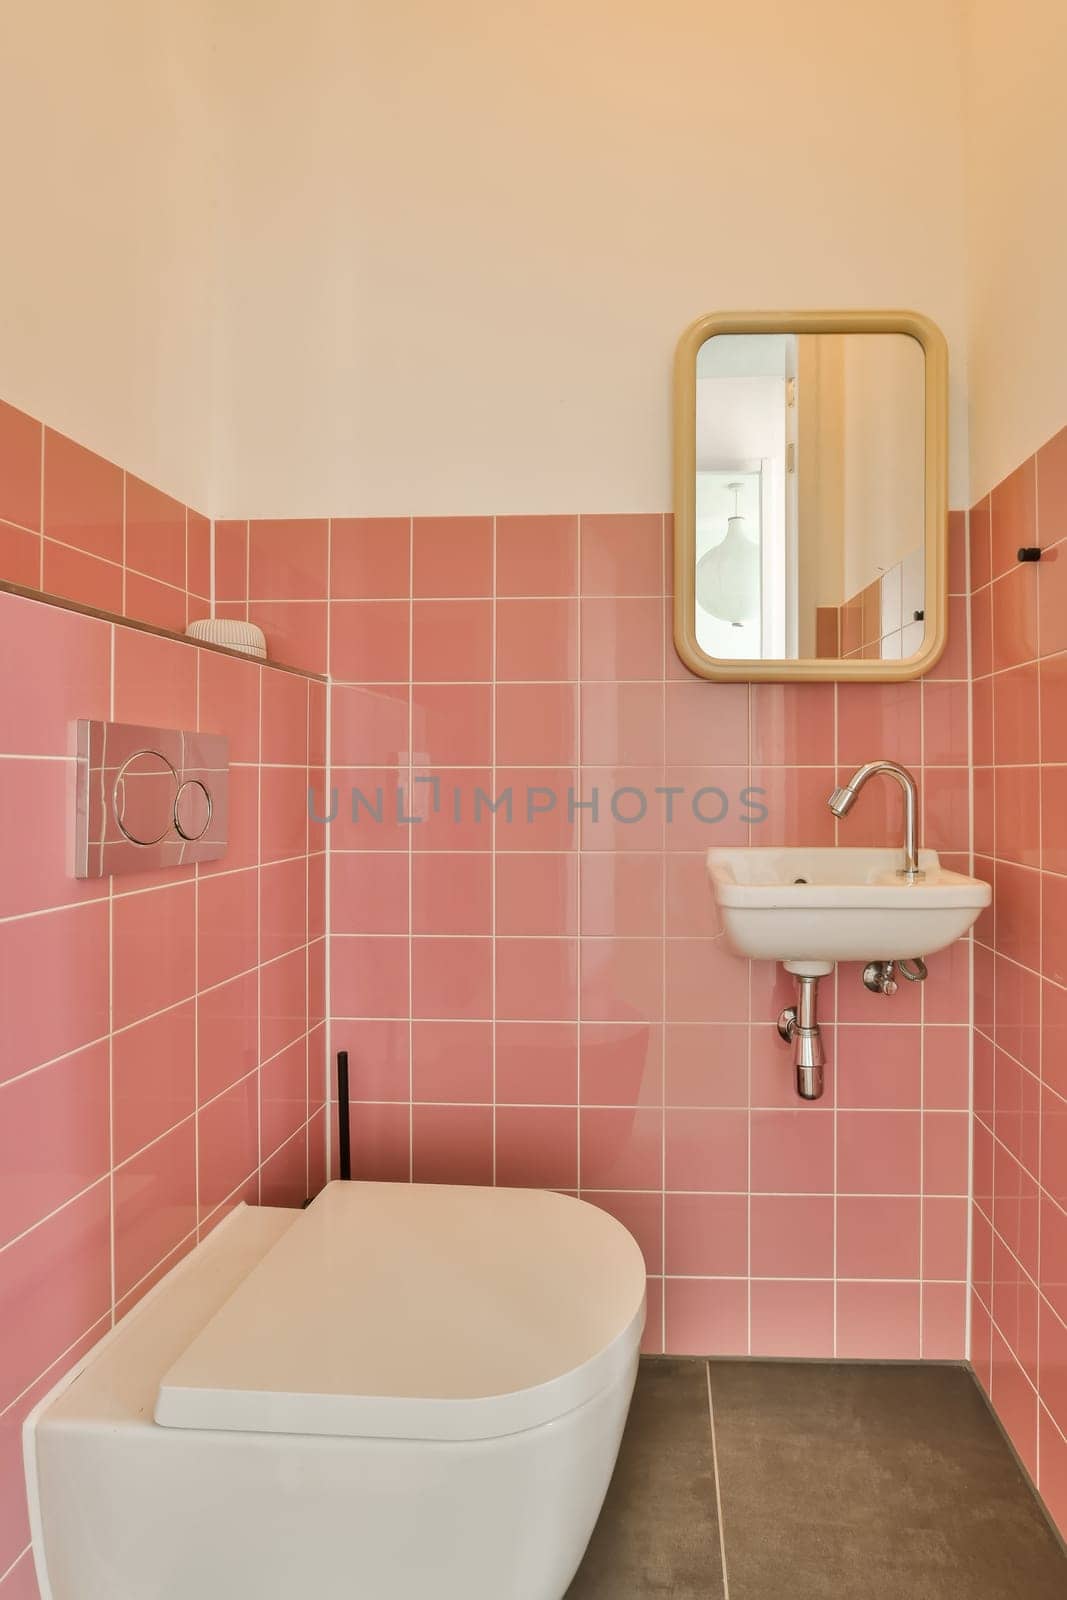 a bathroom with pink tiles on the walls, and a white toilet bowl in the corner next to the sink